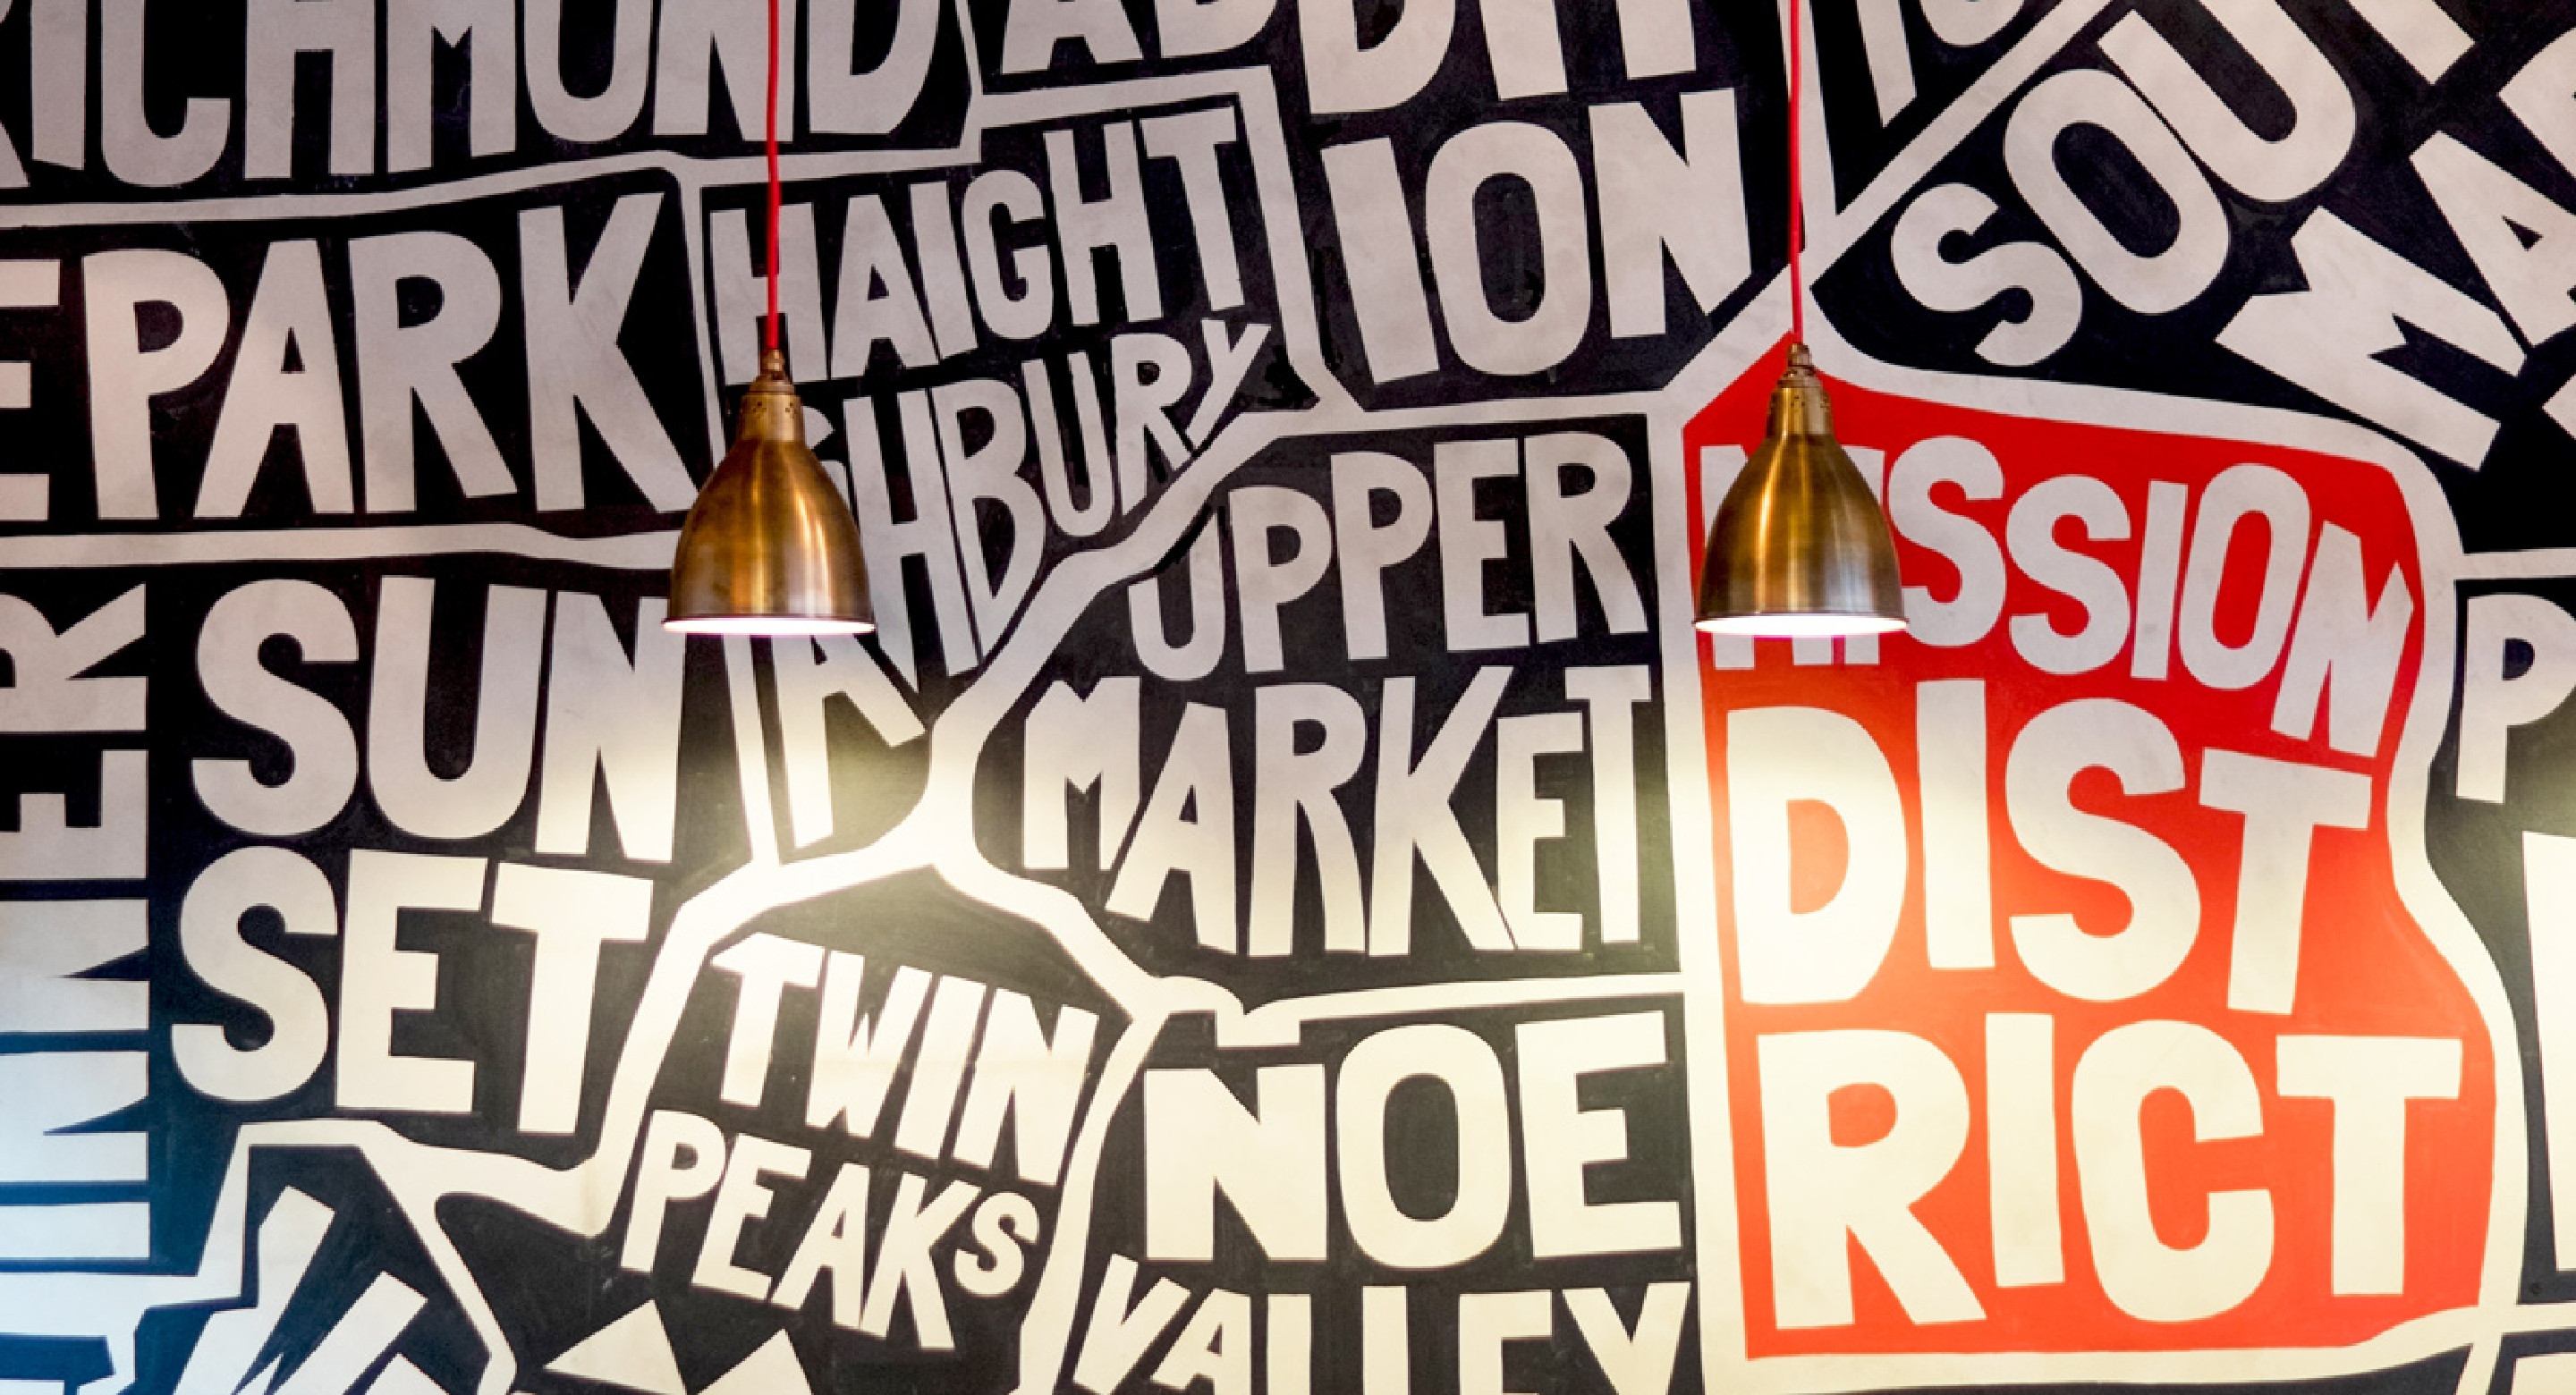 Restaurant typographic map wall mural design by Root Studio